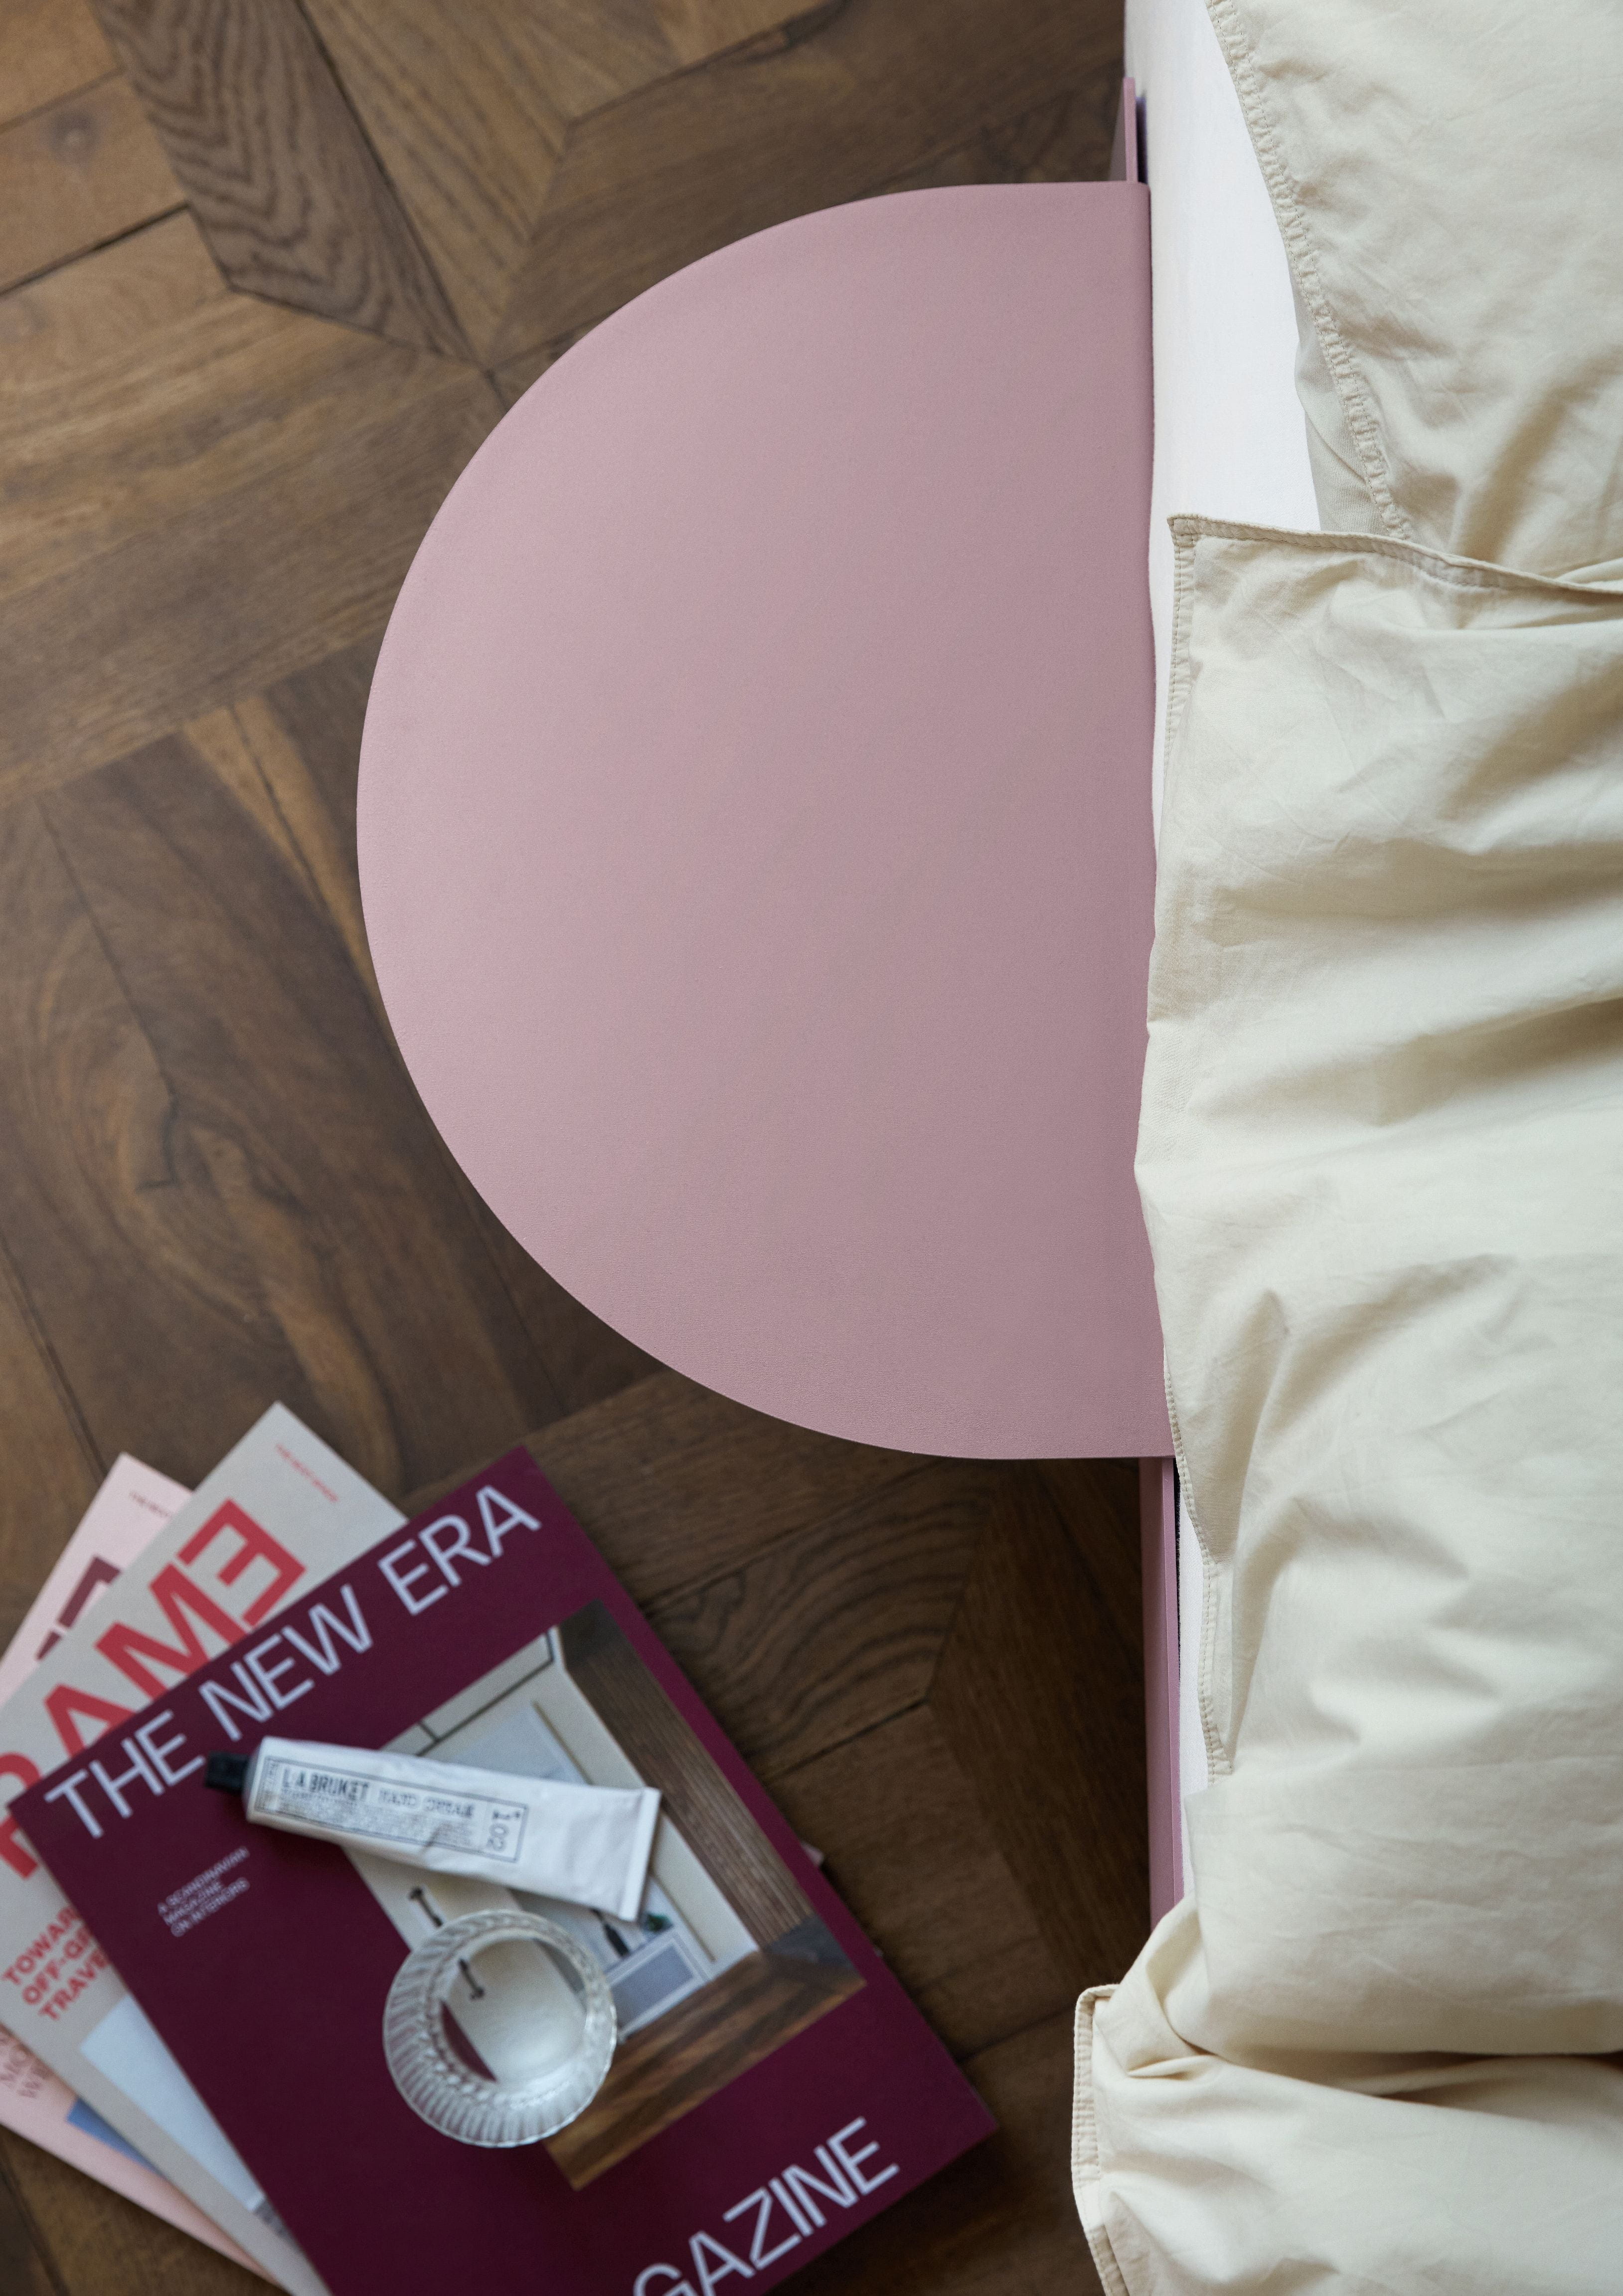 Moebe Bed With 2 Bedside Tables 90 Cm, Dusty Rose